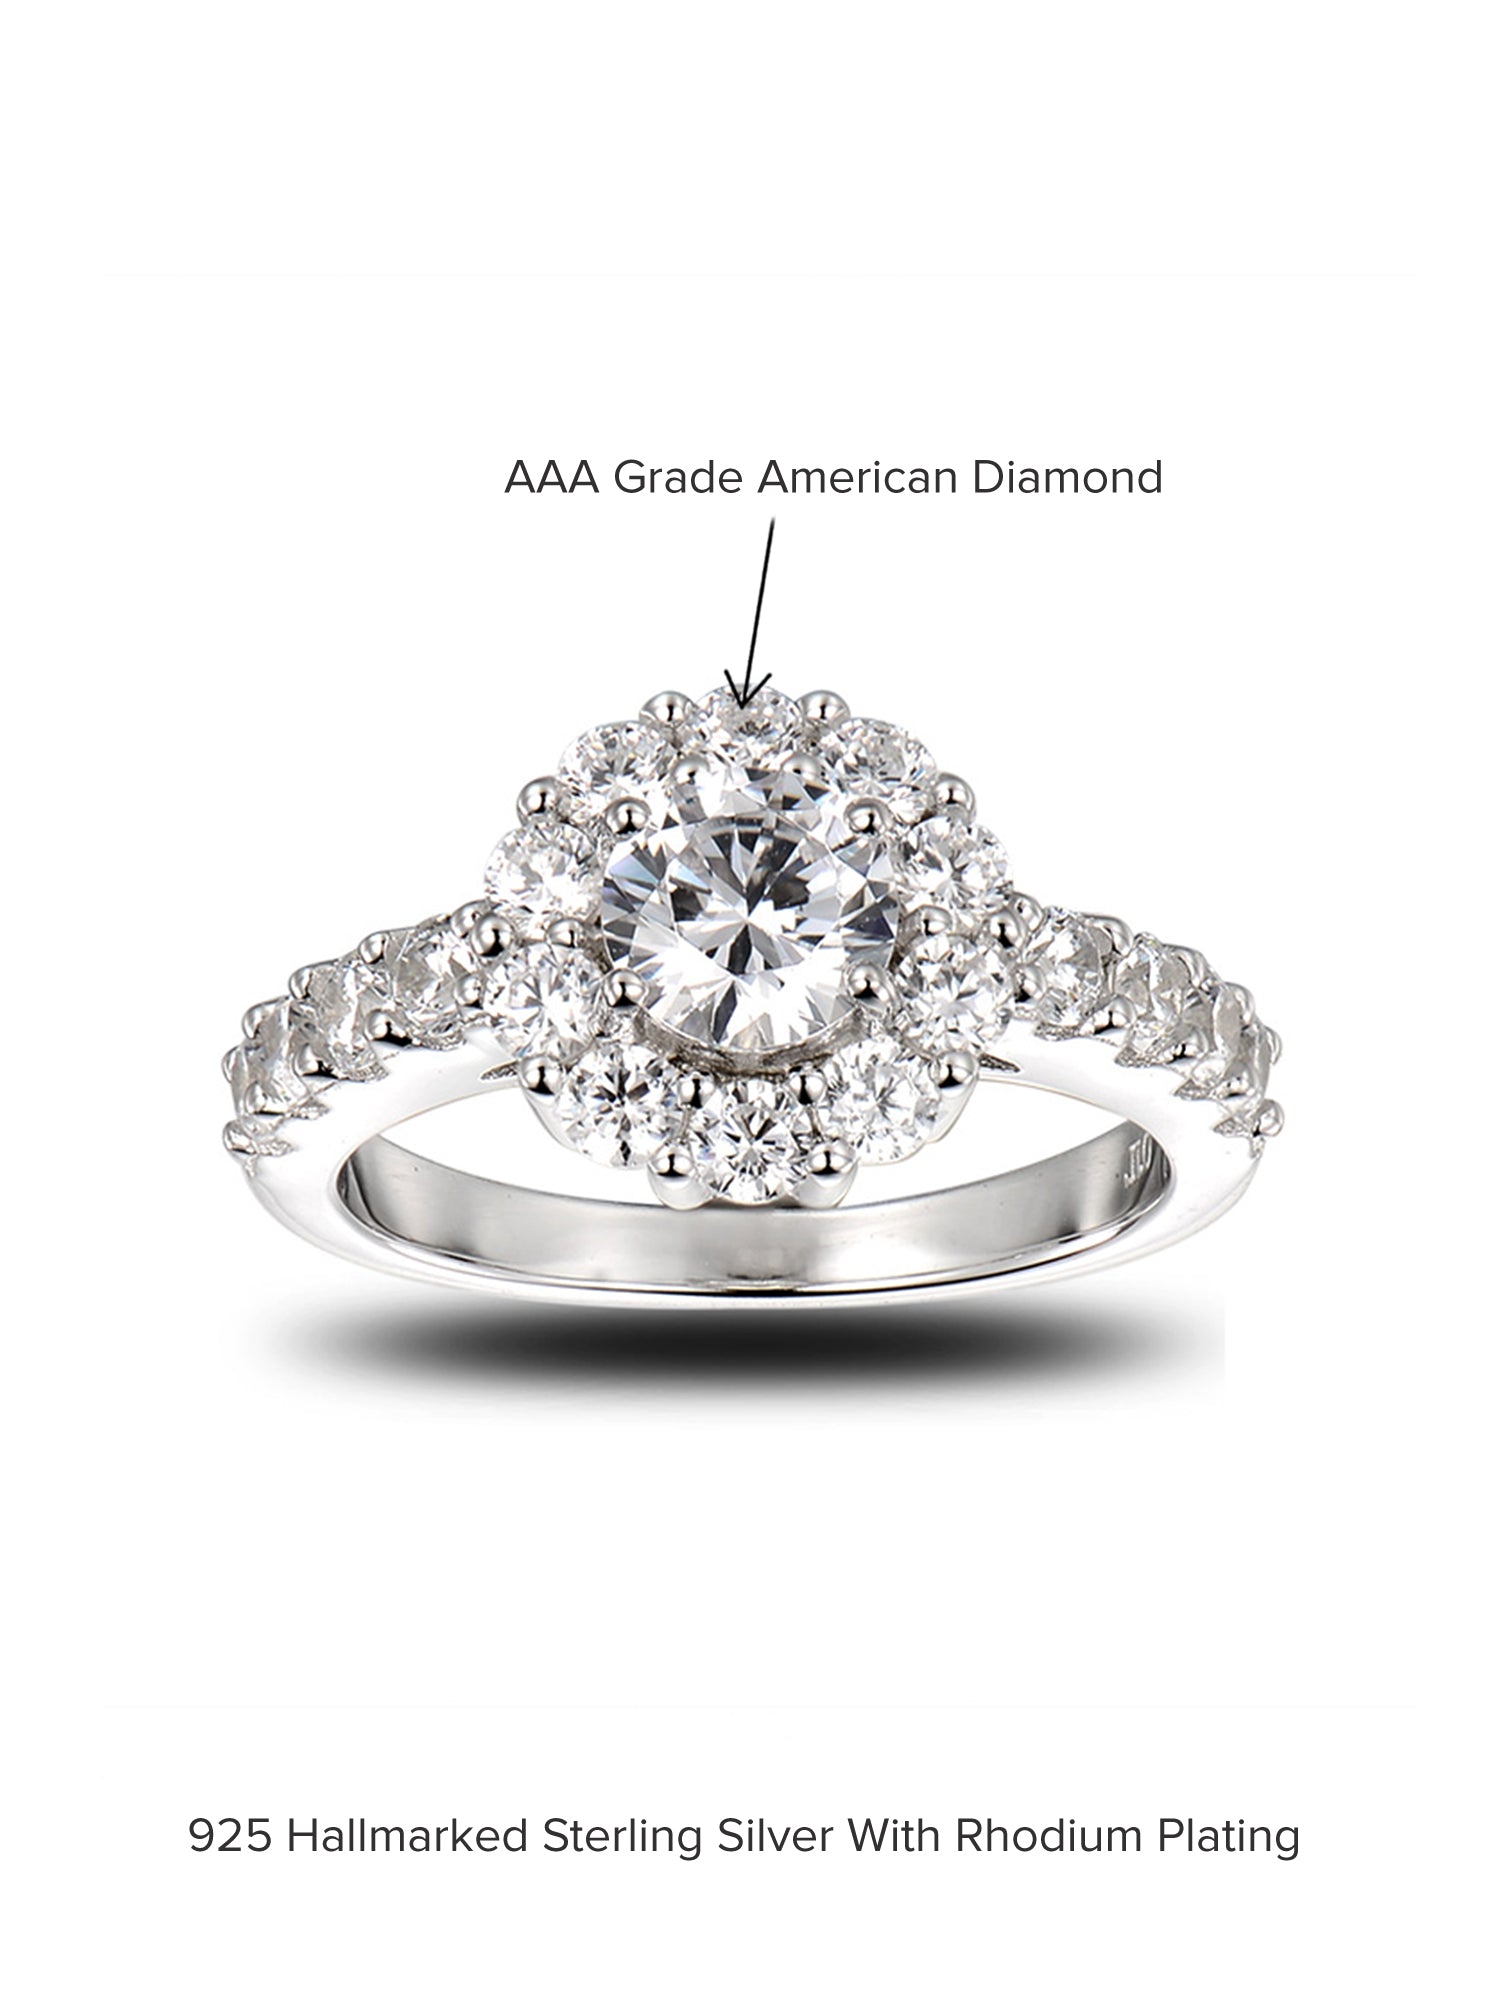 THE PERFECT 0.75 CARAT SOLITAIRE RING-6